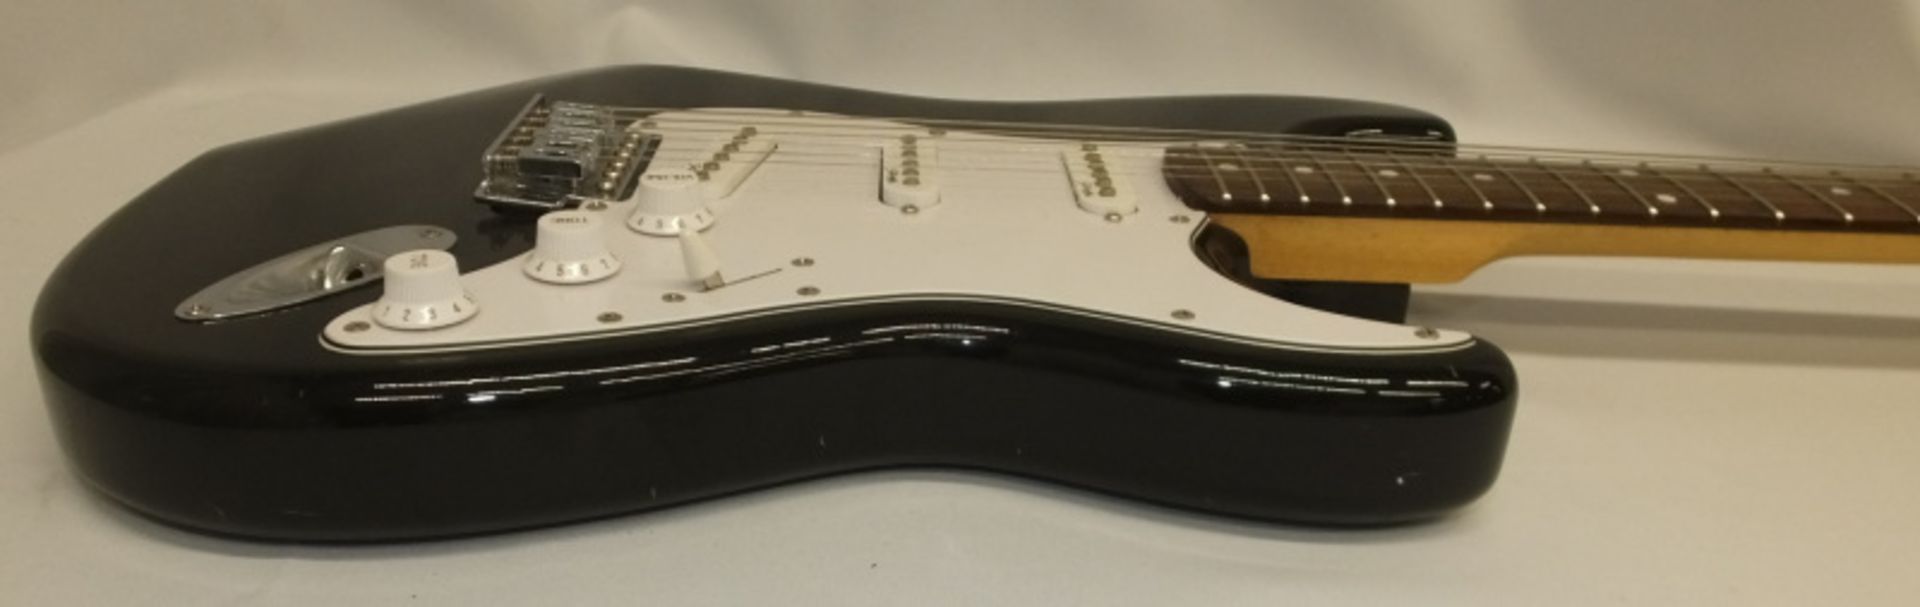 Stagg Electric guitar in case - Image 6 of 8